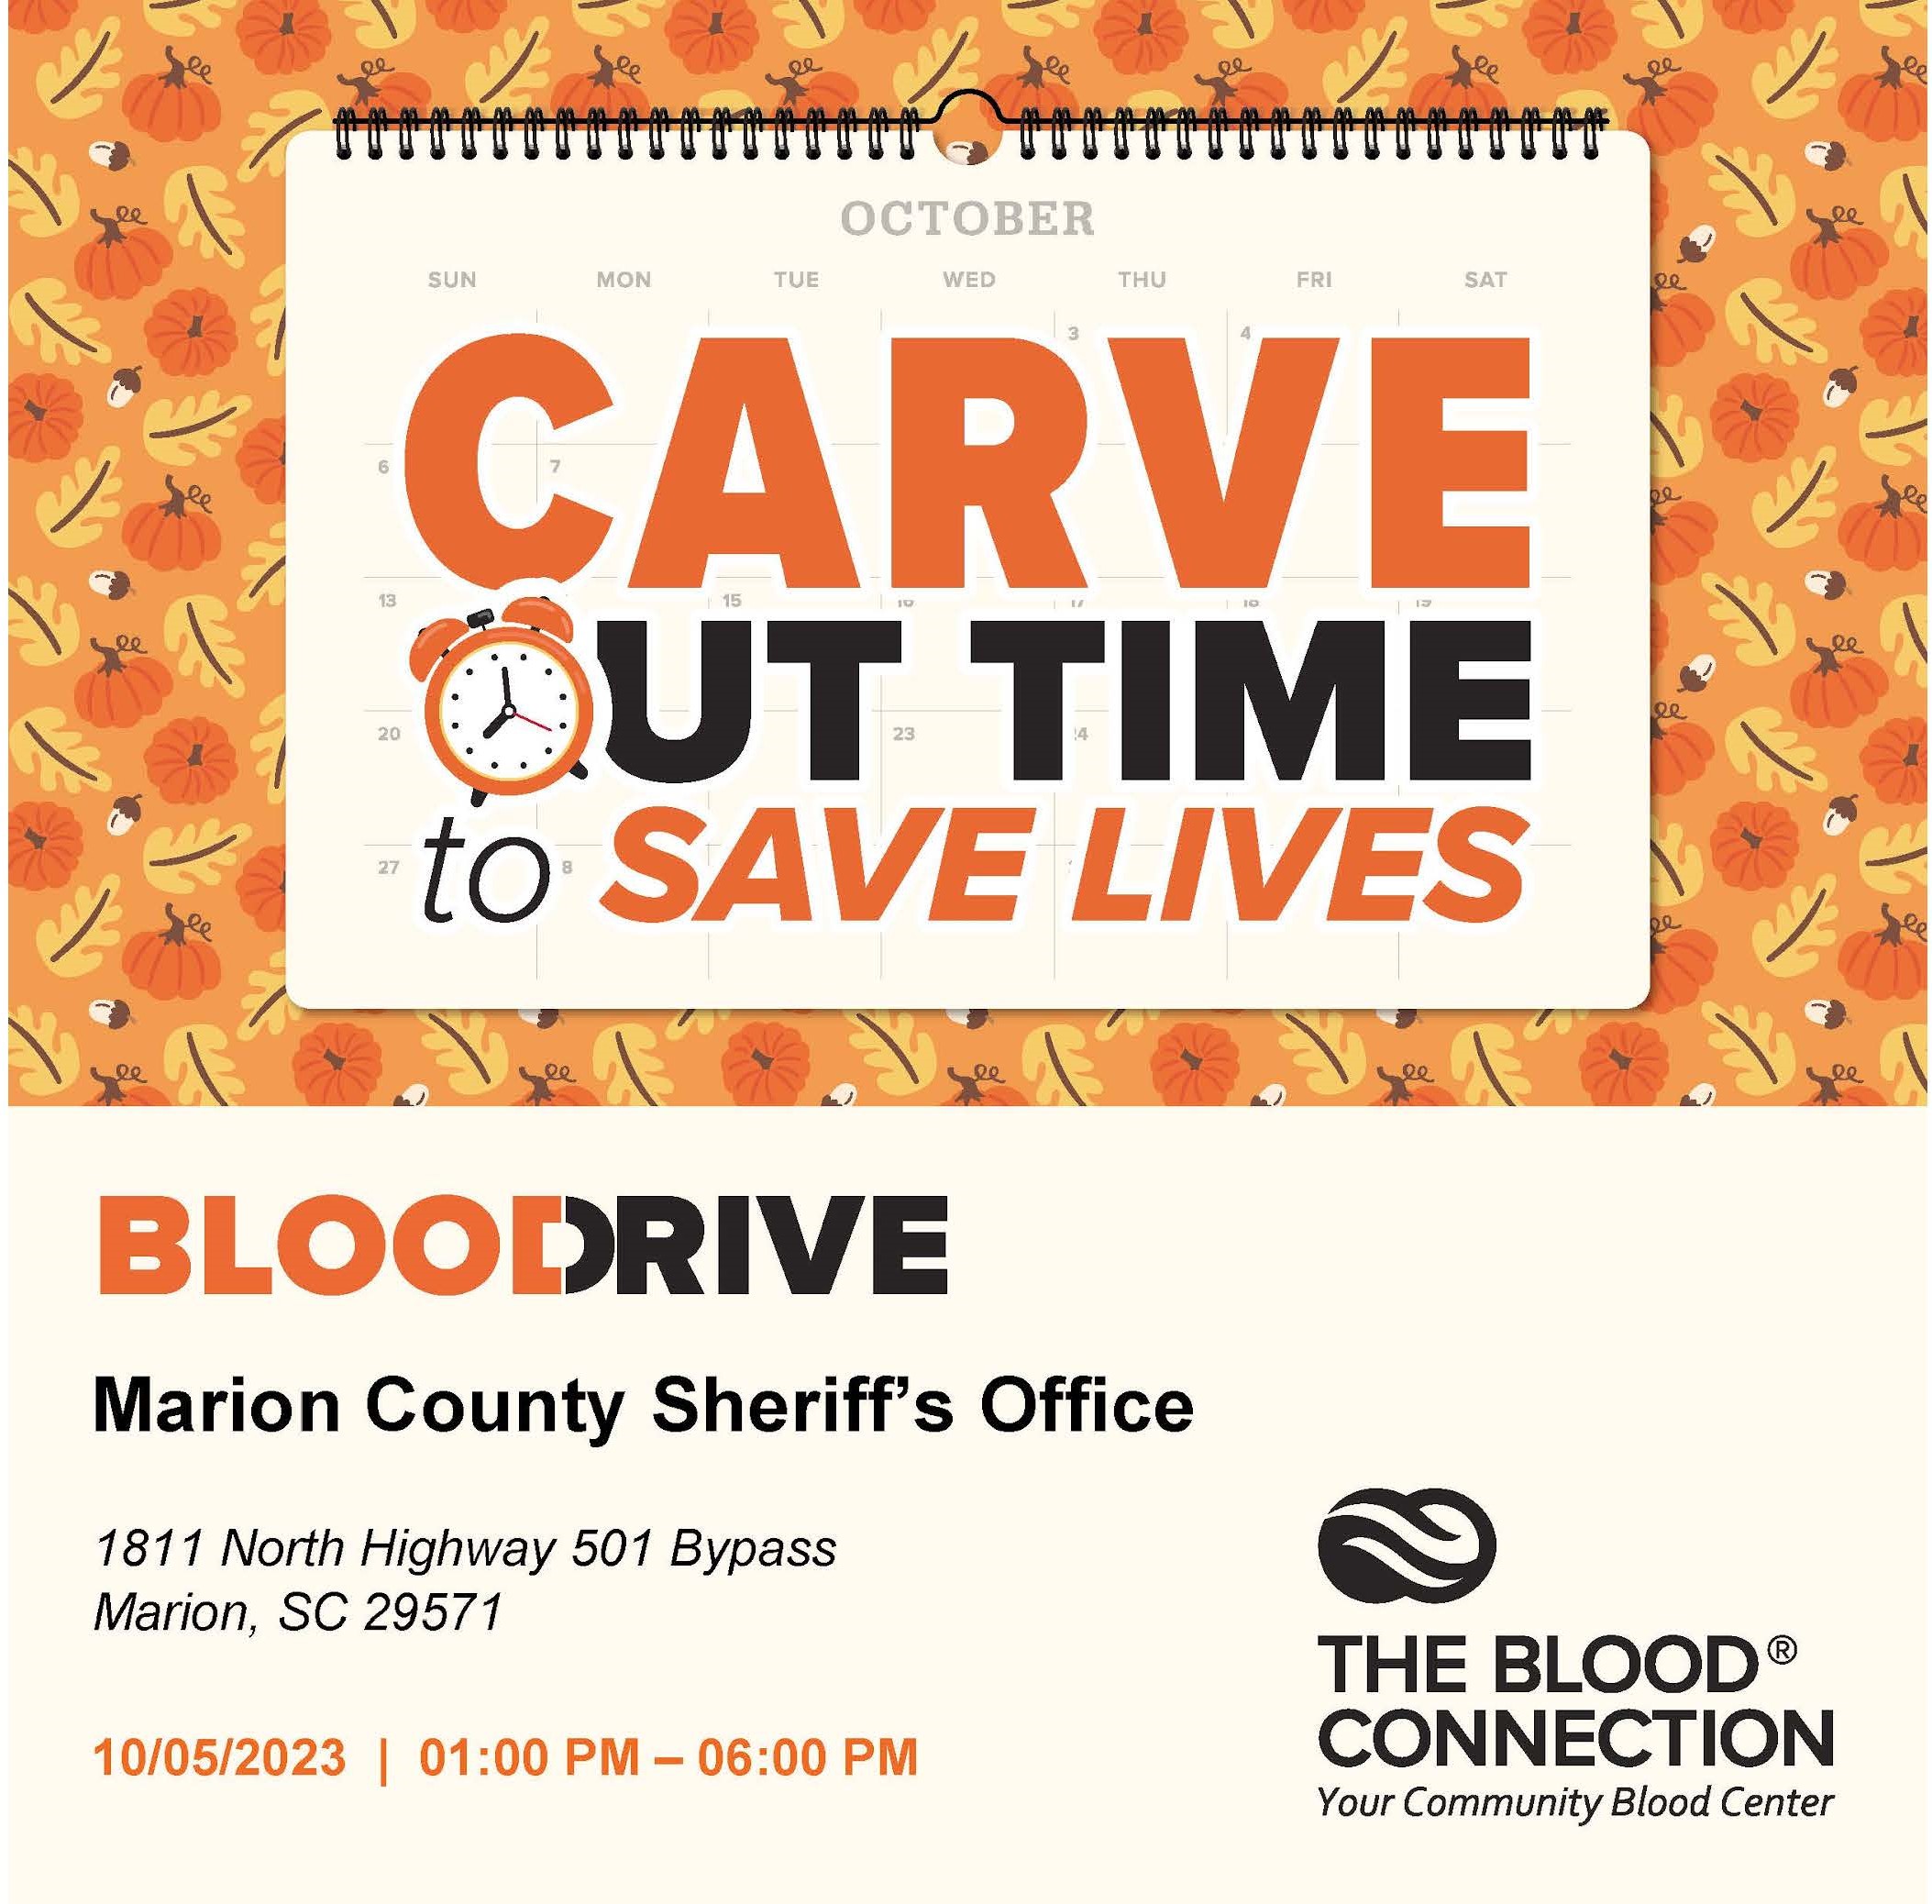 County of Marion Mail - Your blood donation can help save lives._Join Our Marion County Sheriff's Office Blood Drive and Give the Gift of Life!_